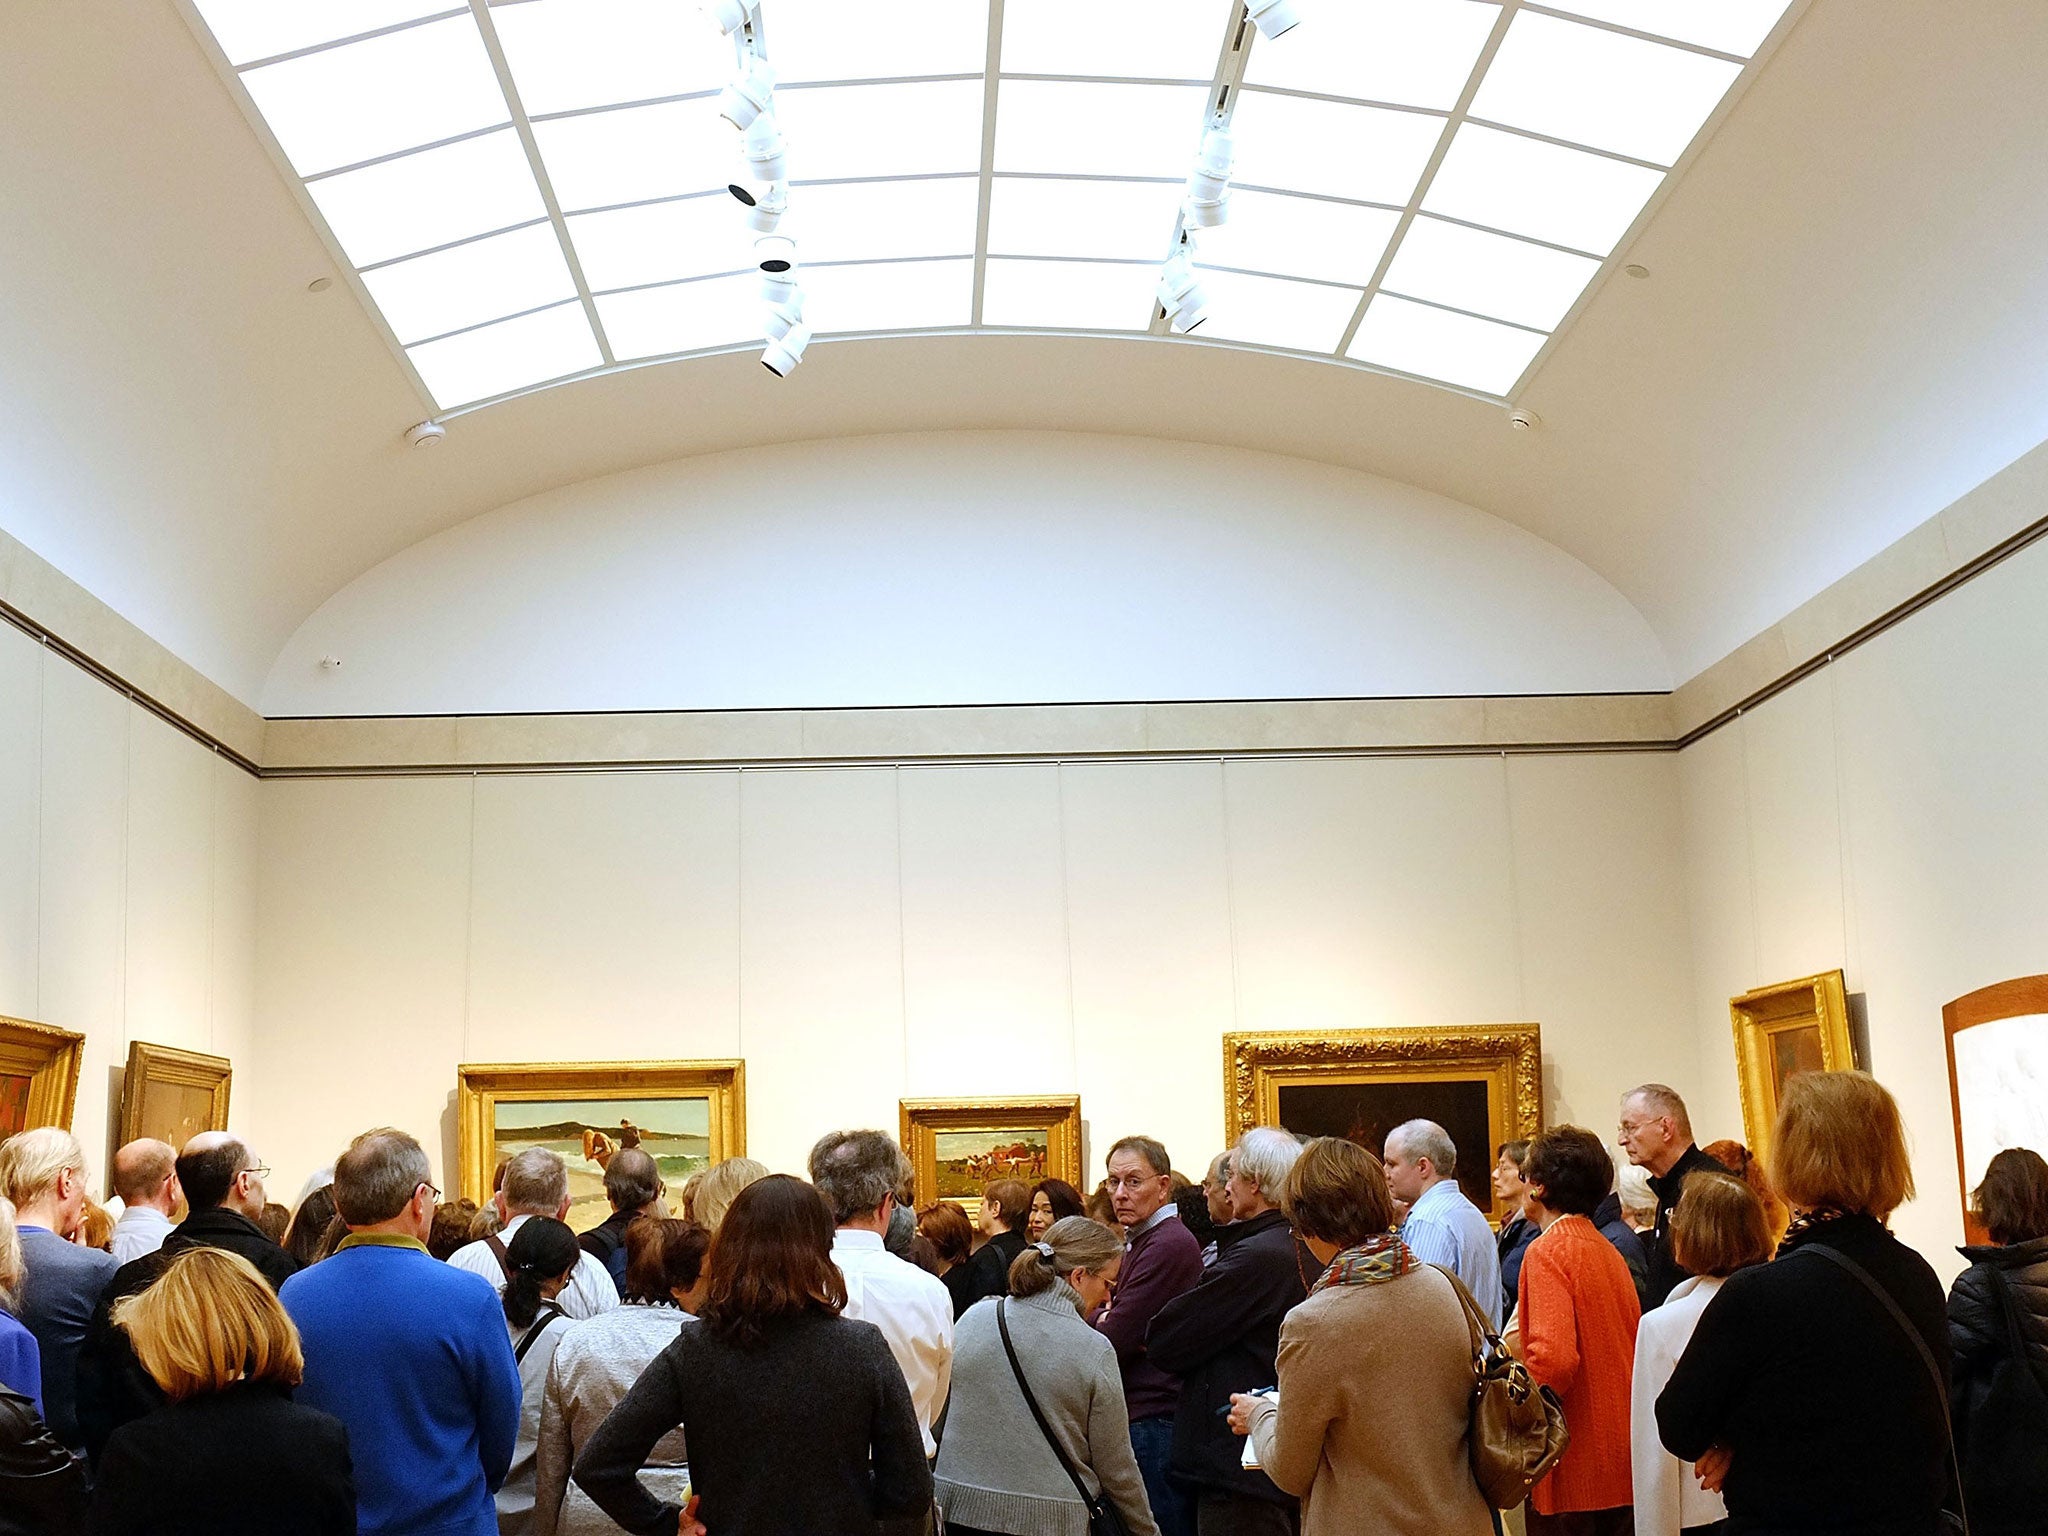 Crowd control: institutions like New York’s Metropolitan Museum of Art are packed